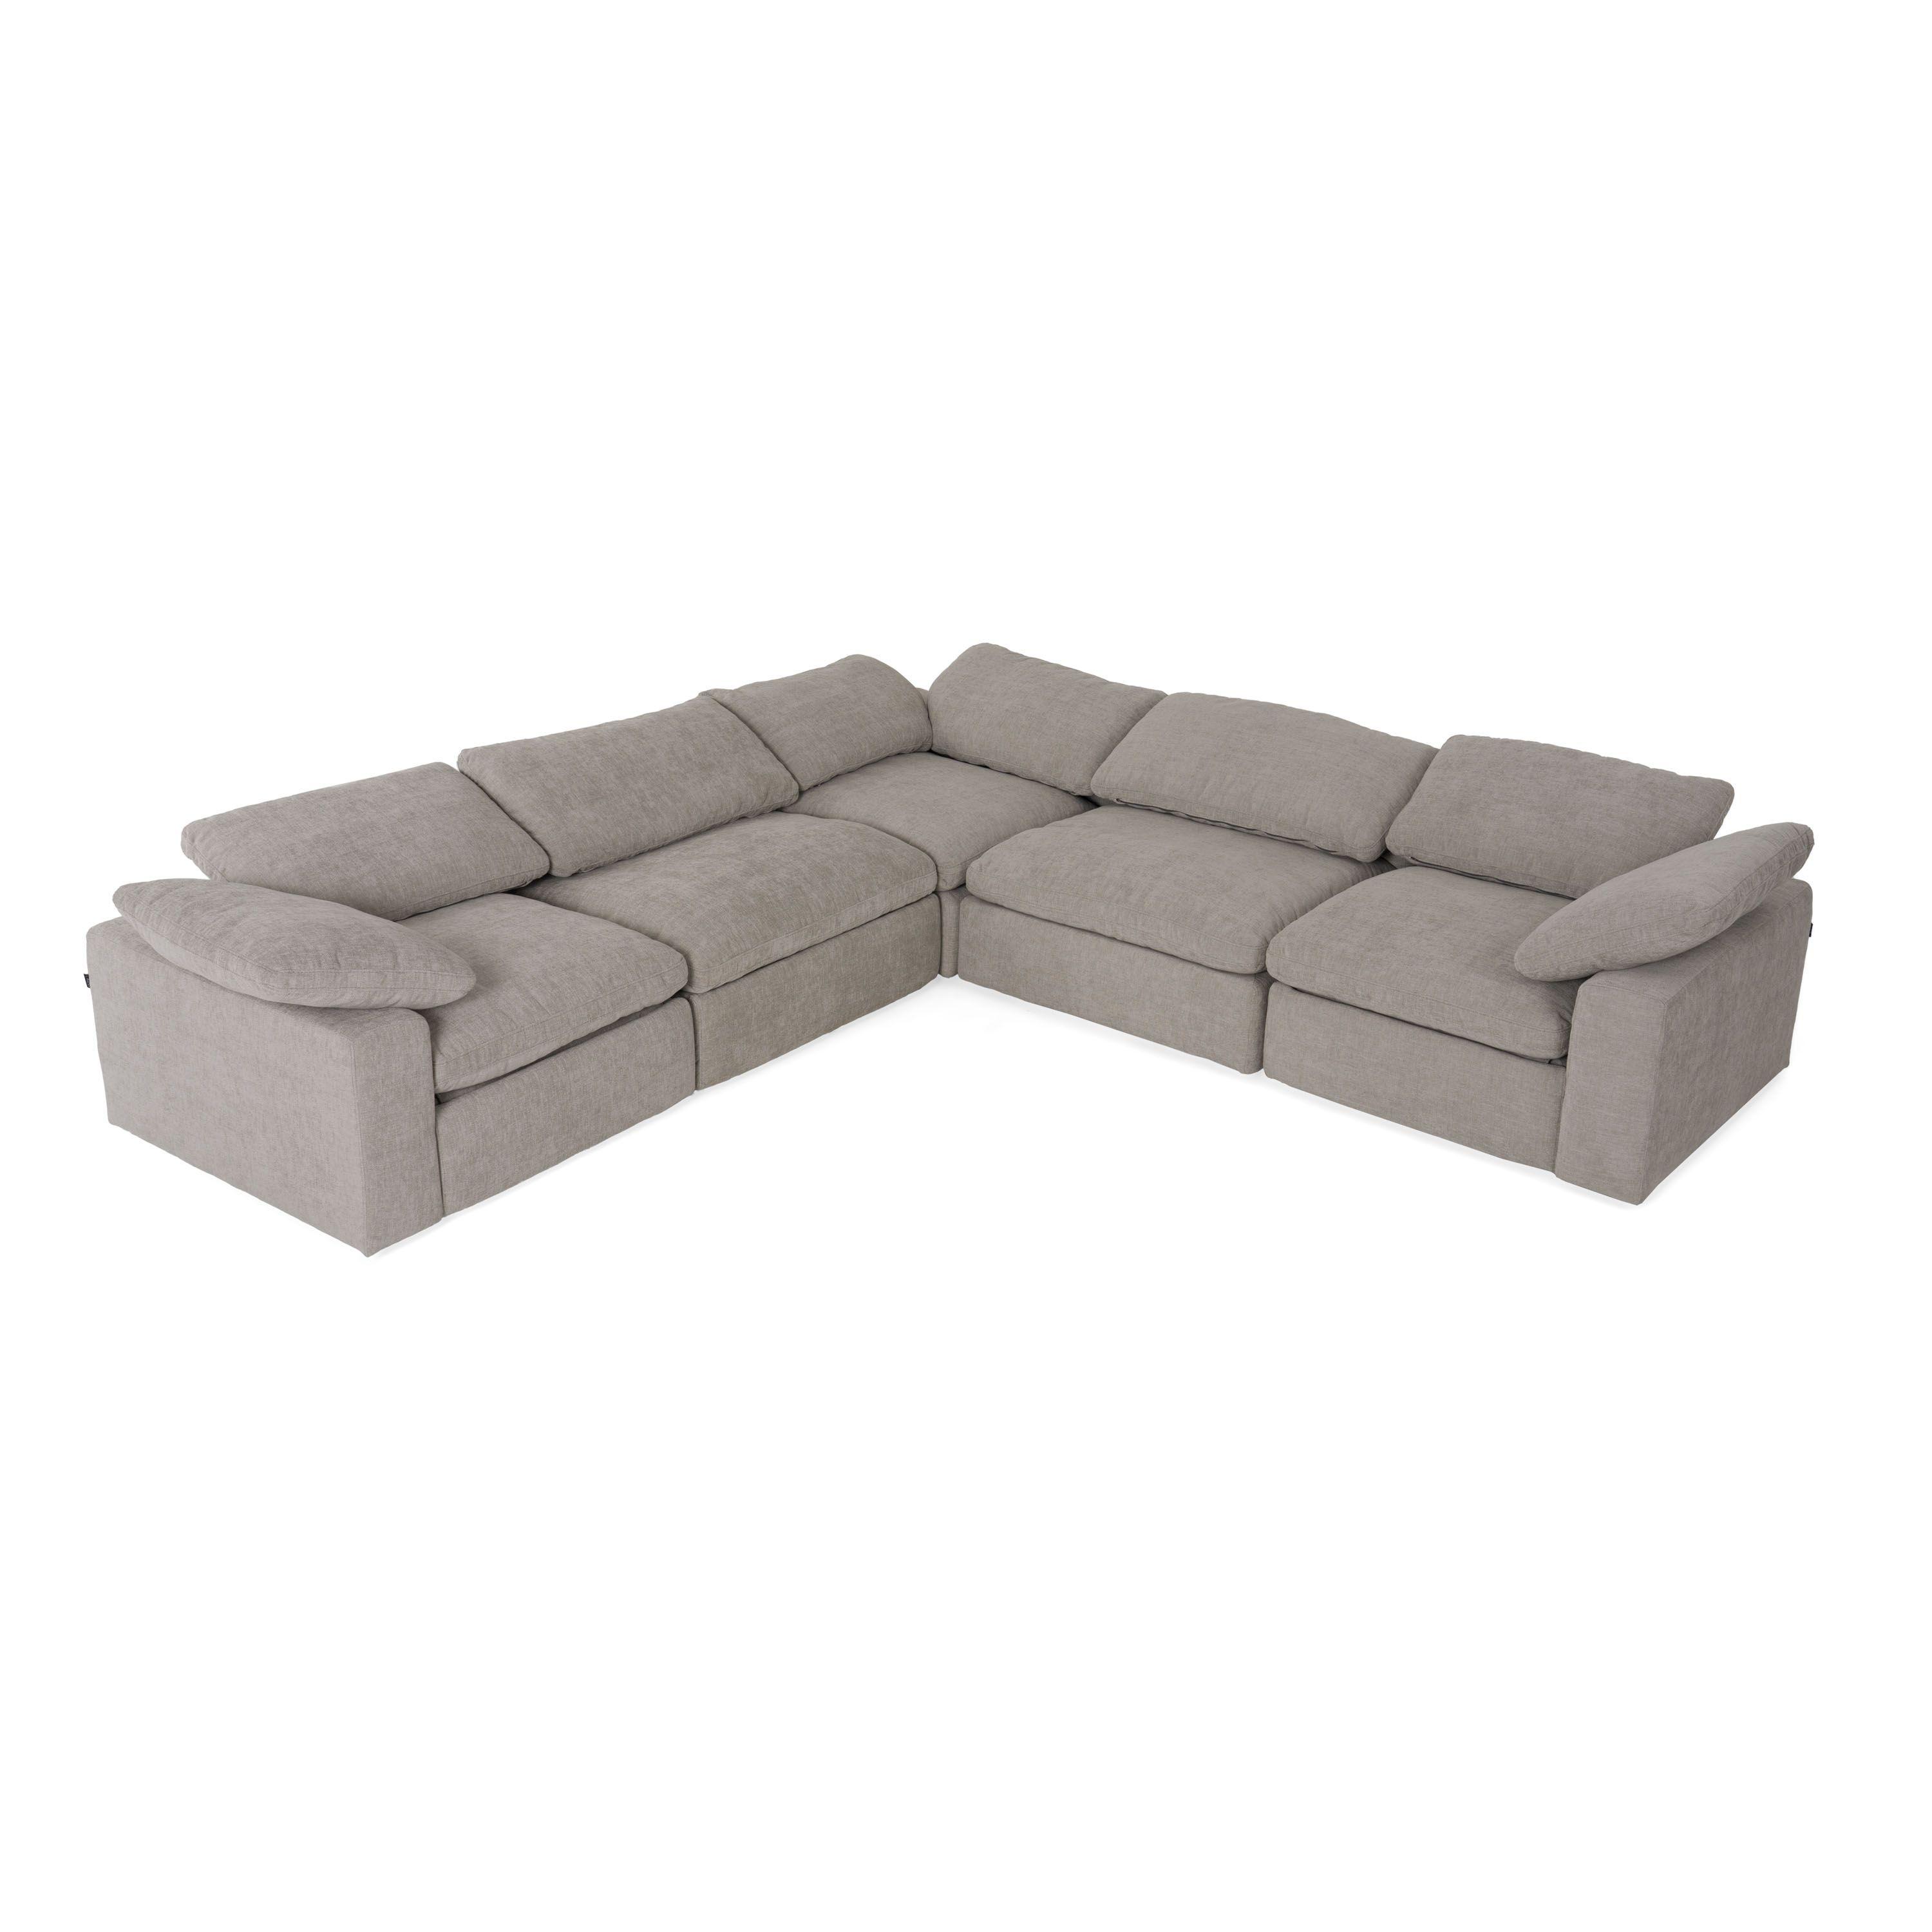 Modern Reclining Sectional Corinth Reclining Sectional Sofa VGKM-KM.920-GRY VGKM-KM.920-GRY in Gray Fabric